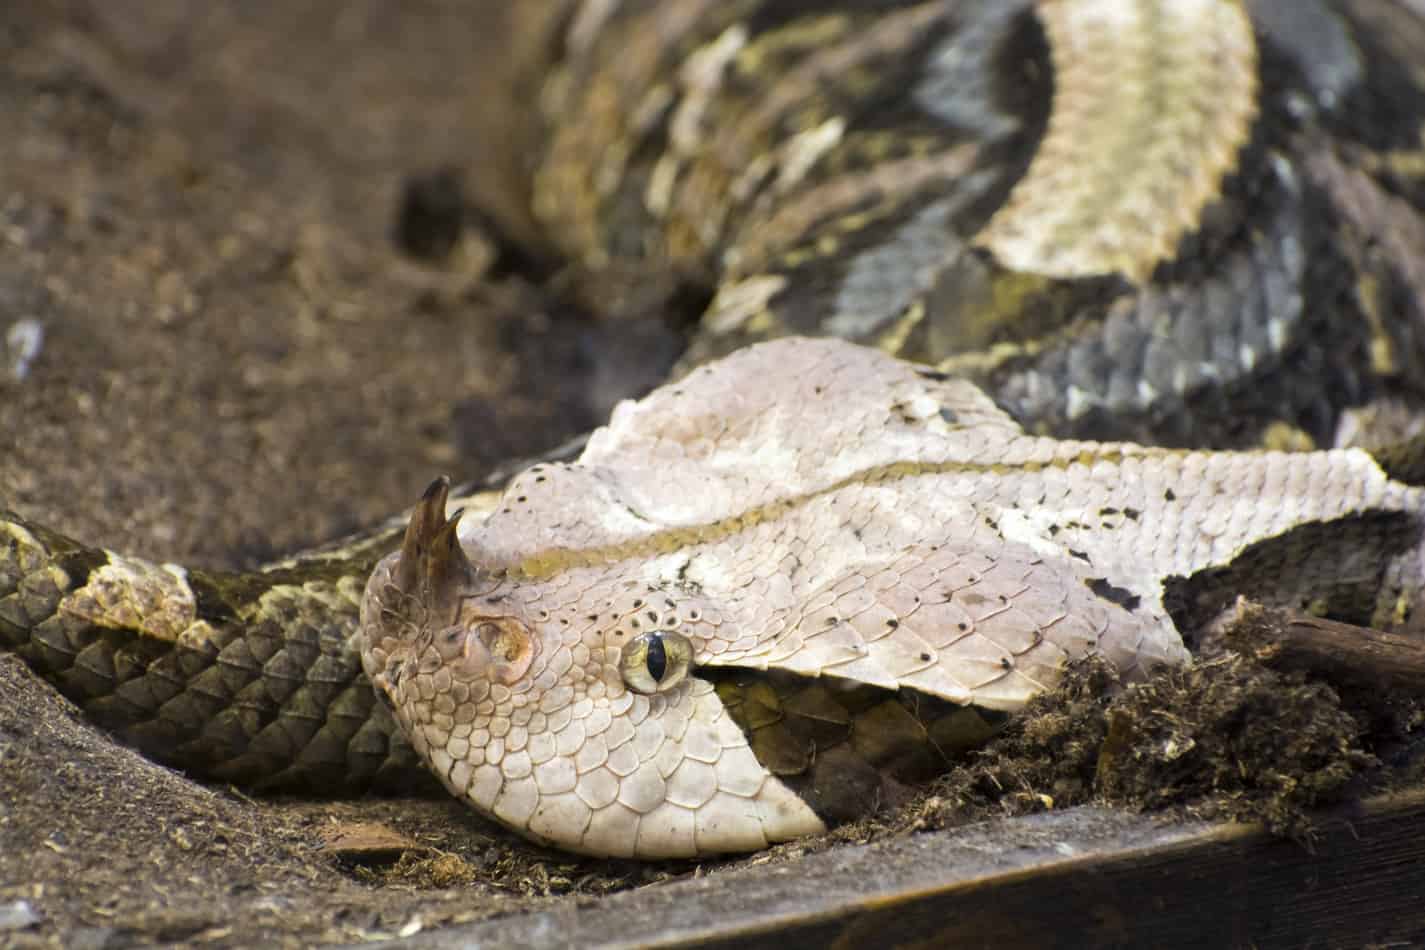 gaboon viper the complete guide 5 Gaboon Viper: The Complete Guide With Pictures and Facts